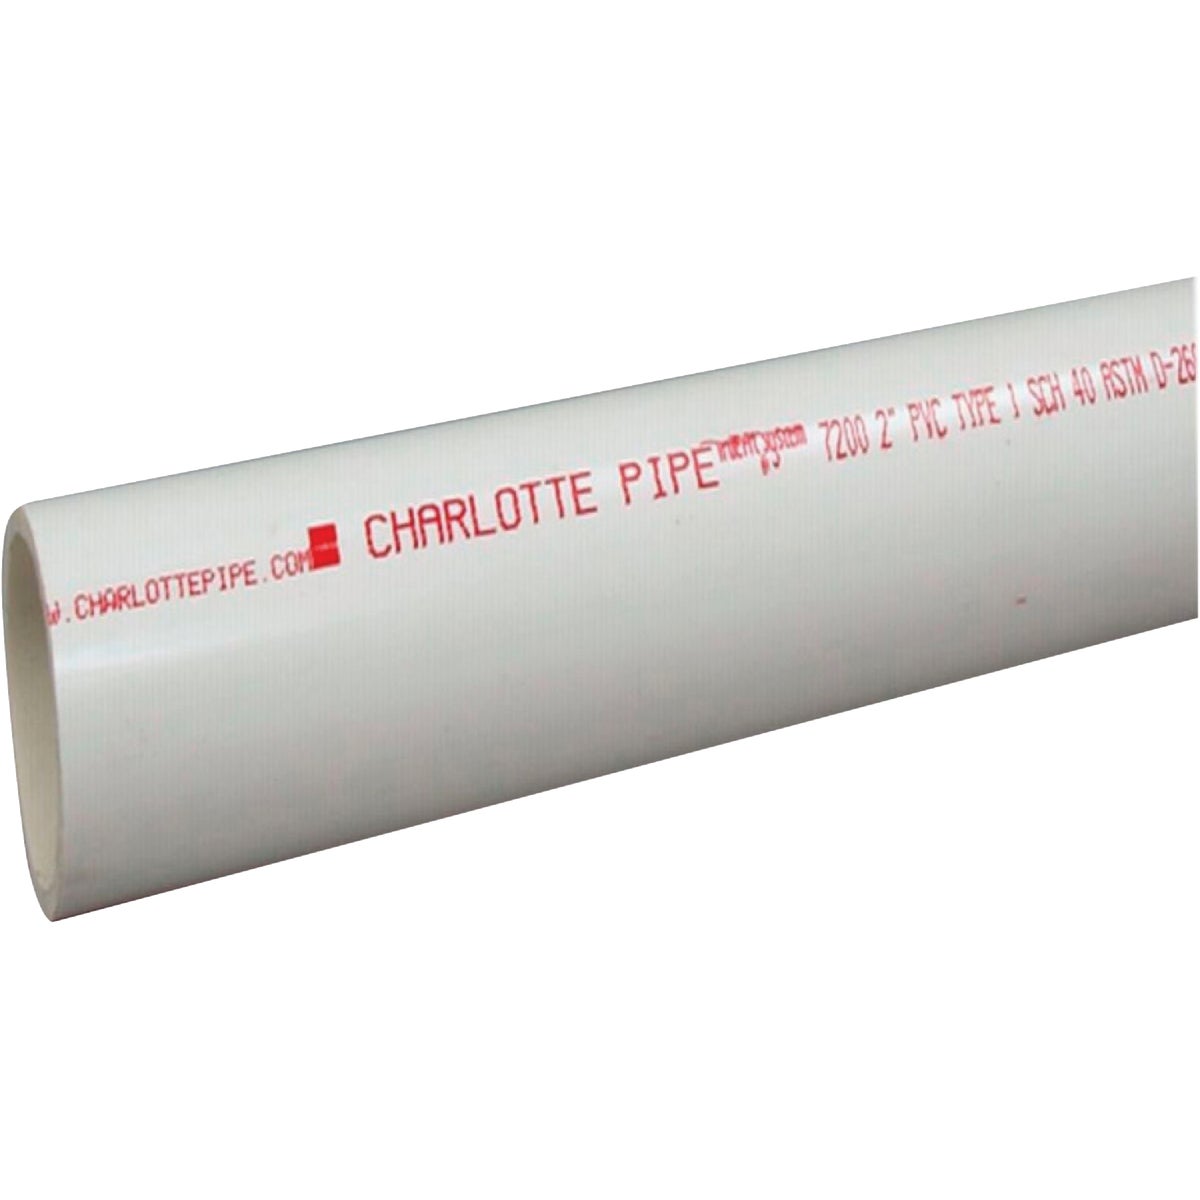 Charlotte Pipe 6 In. x 10 Ft. Schedule 40 PVC DWV/Pressure Dual Rated Pipe